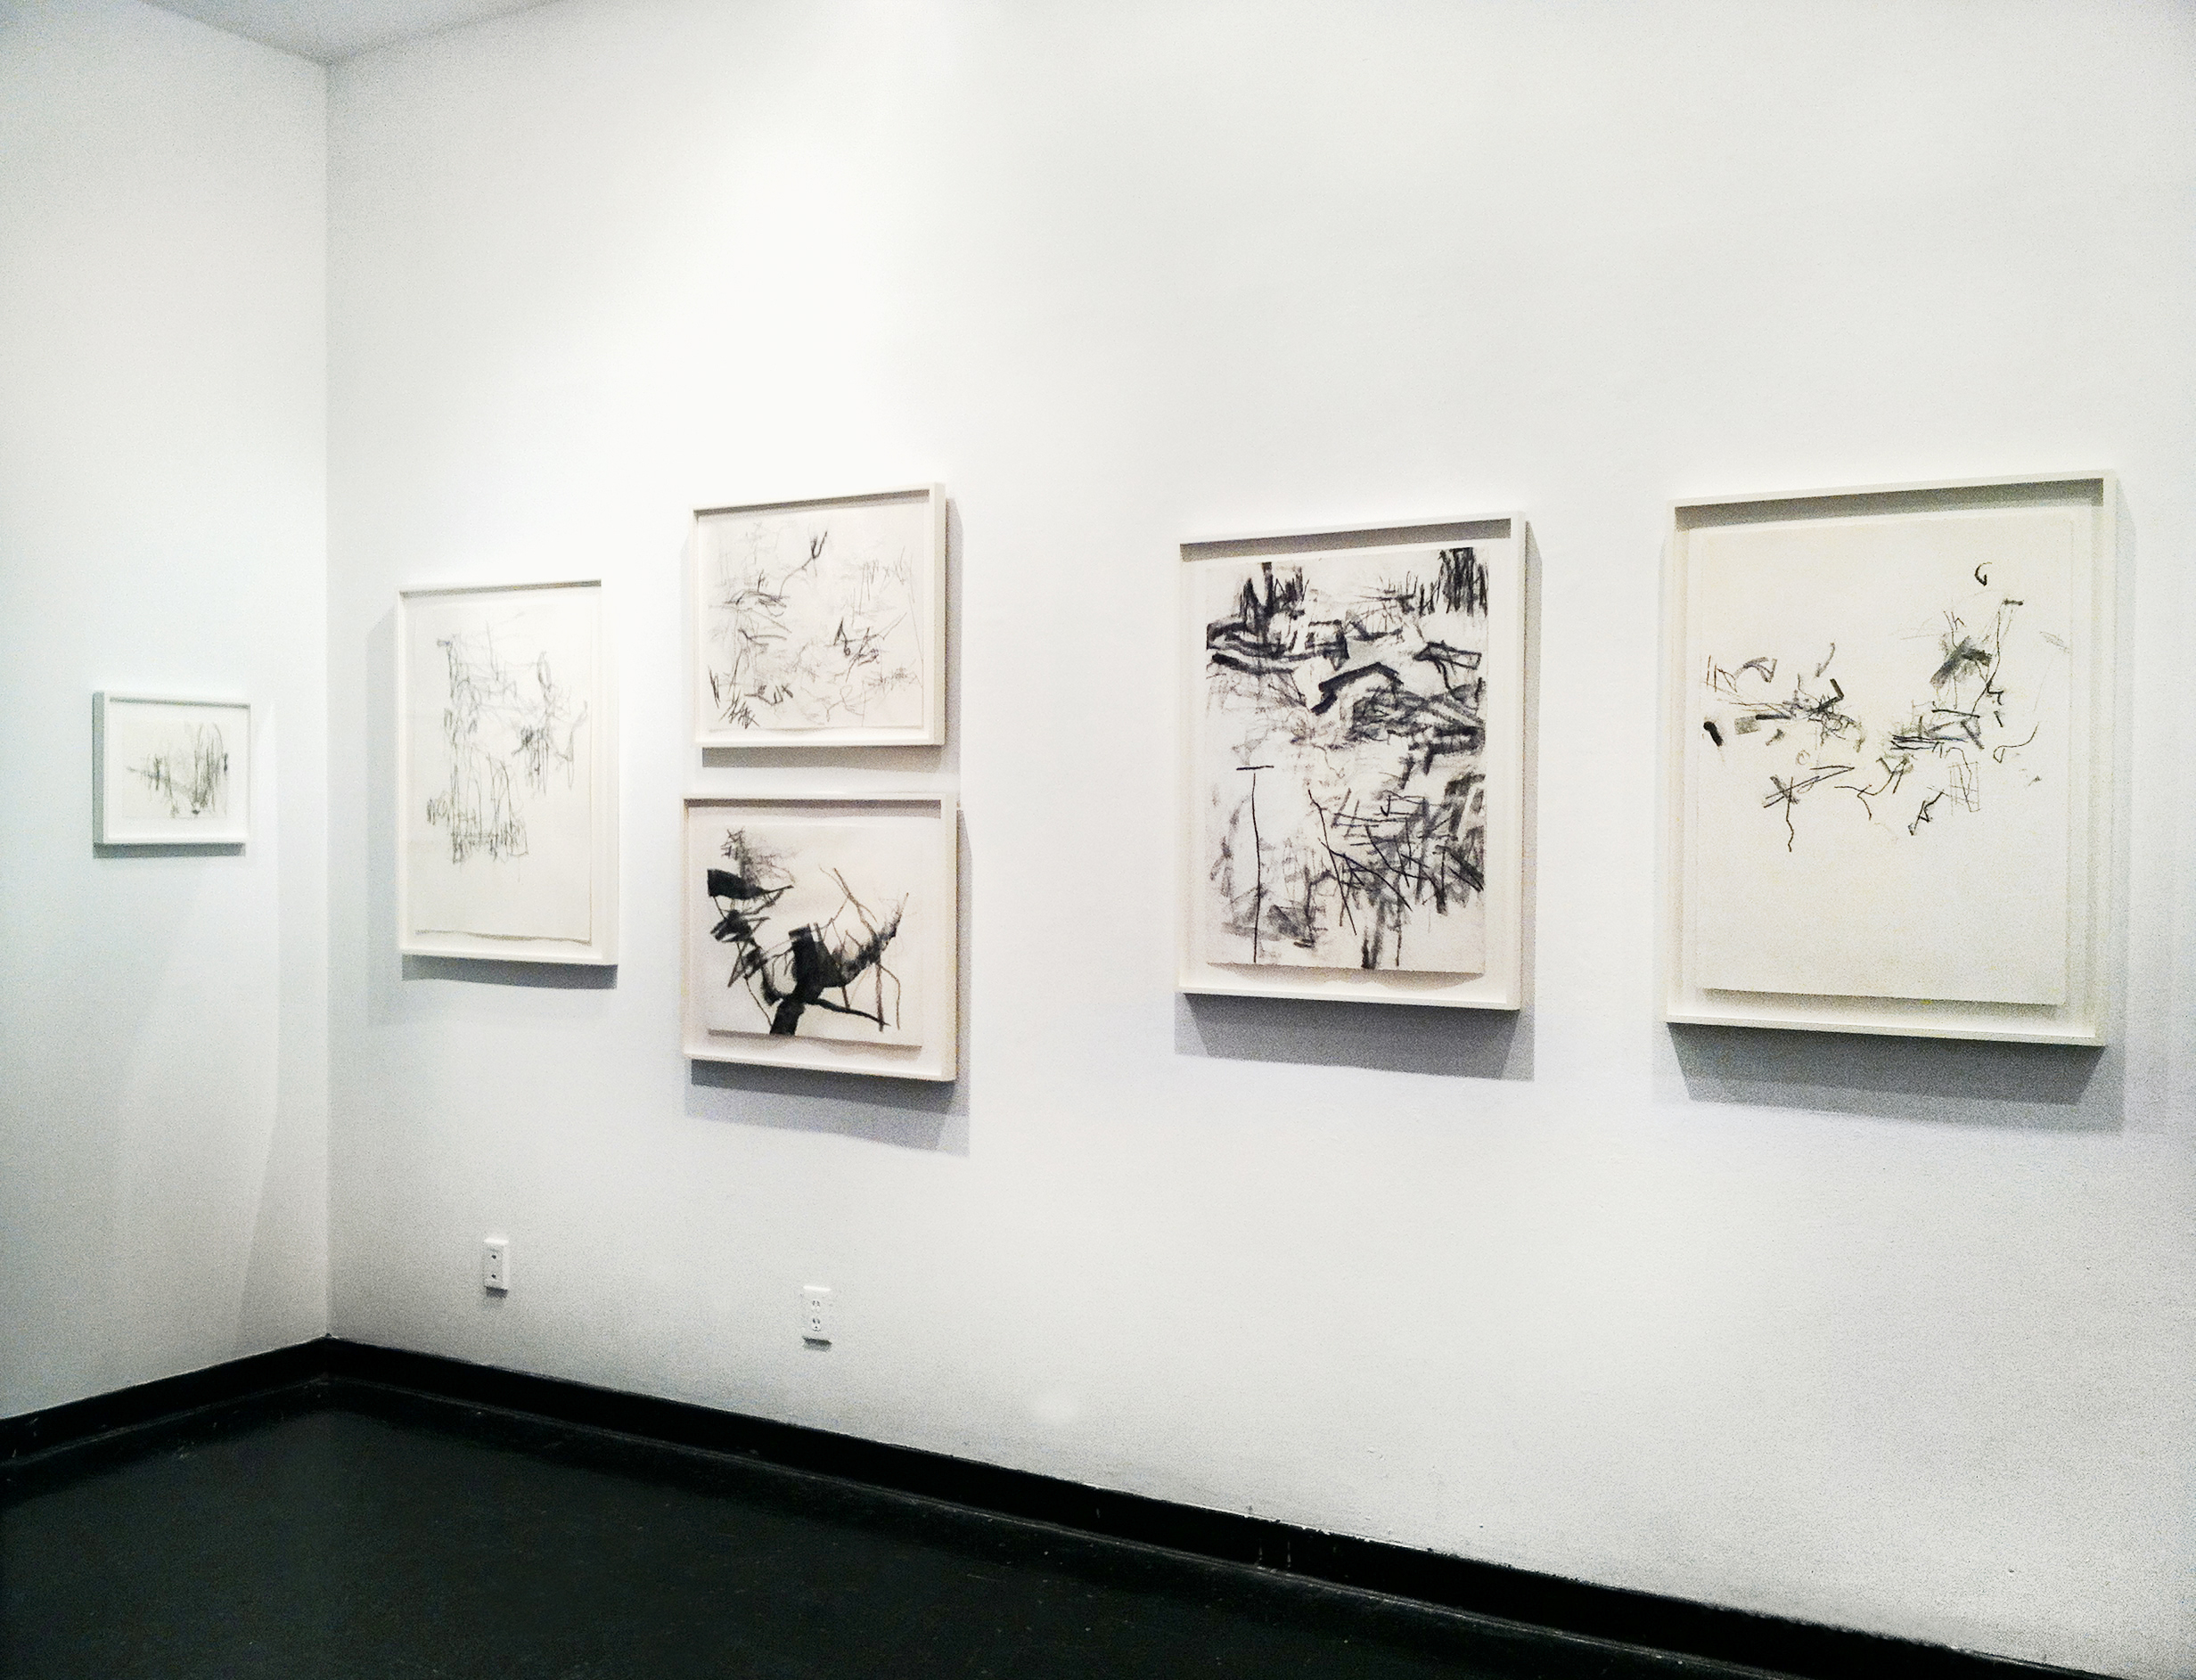   works on view in    Drawing First and Last,     University of the Arts, Philadelphia, 2015   